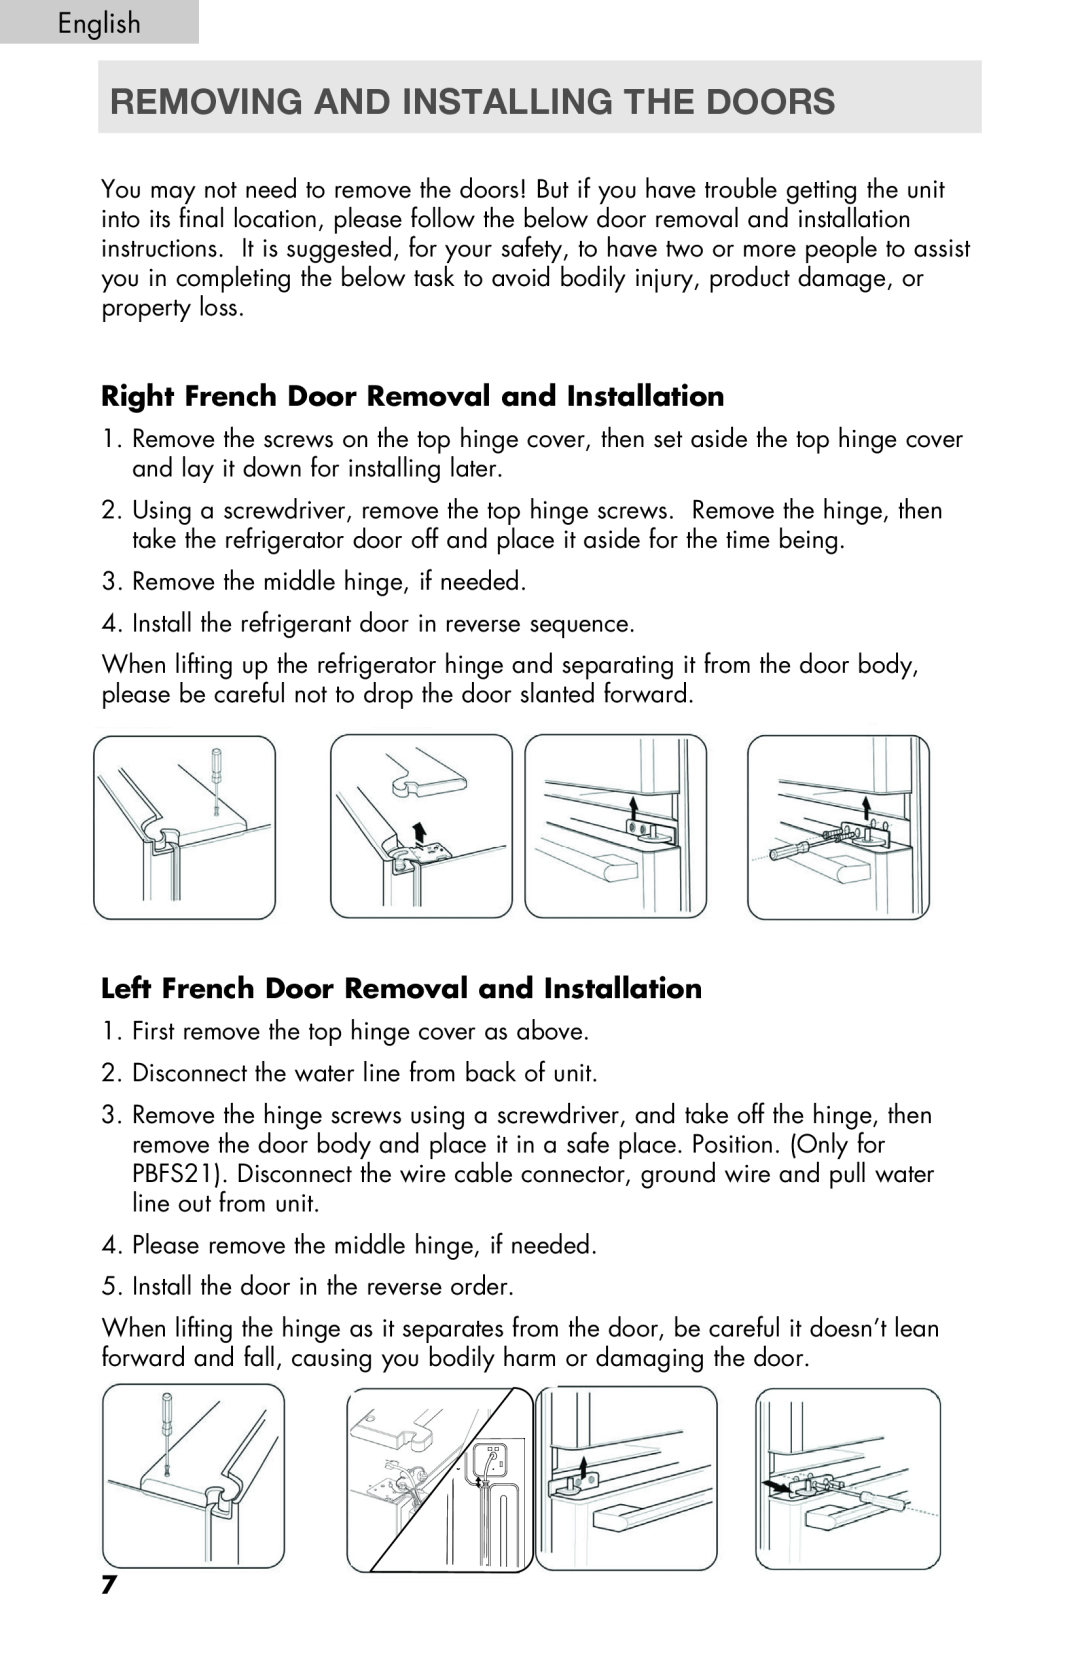 Haier PRFS25 user manual Removing And Installing The Doors, Right French Door Removal and Installation 